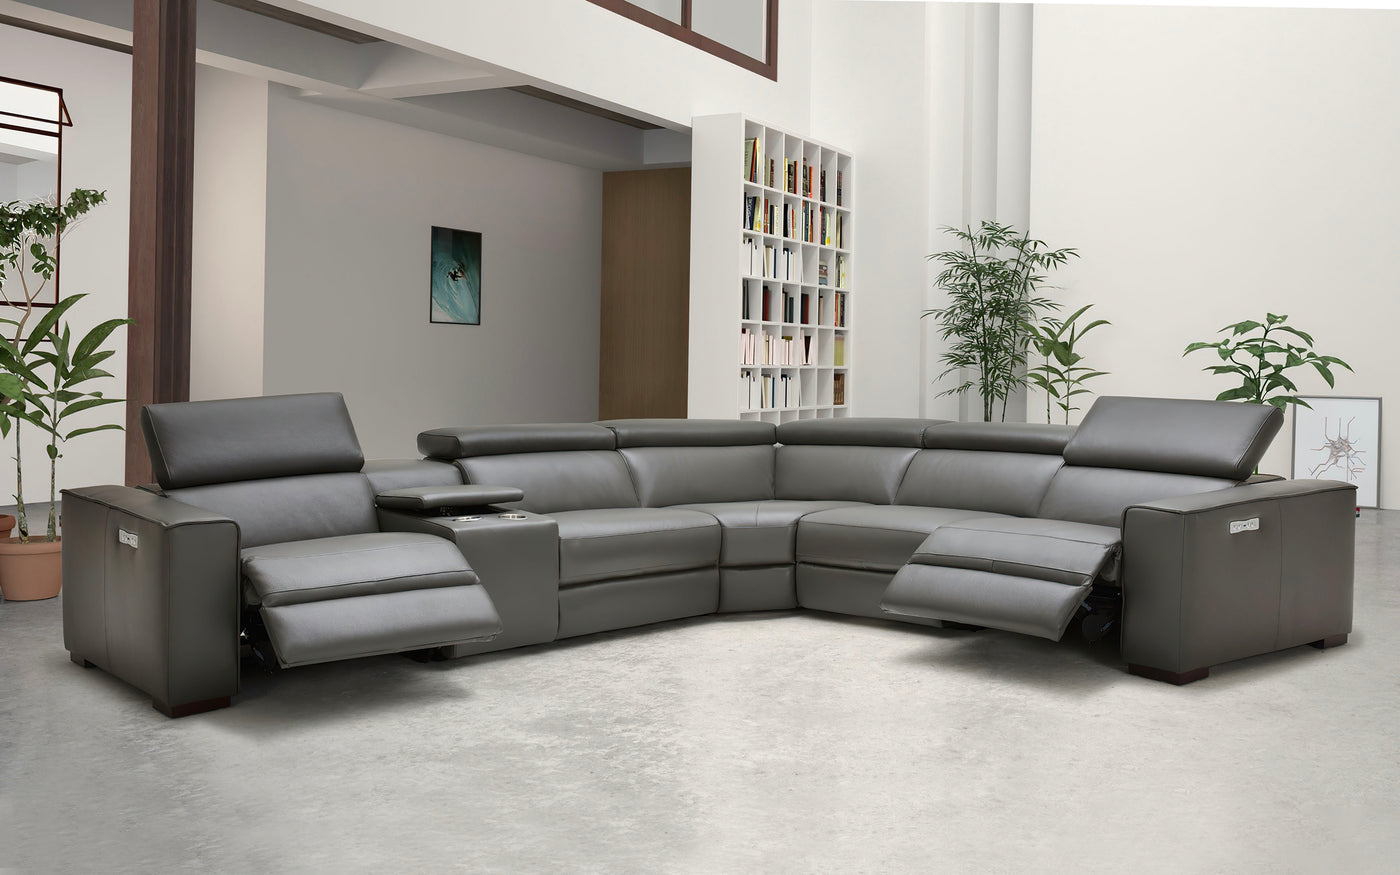 modern leather sectional sofa with recliners